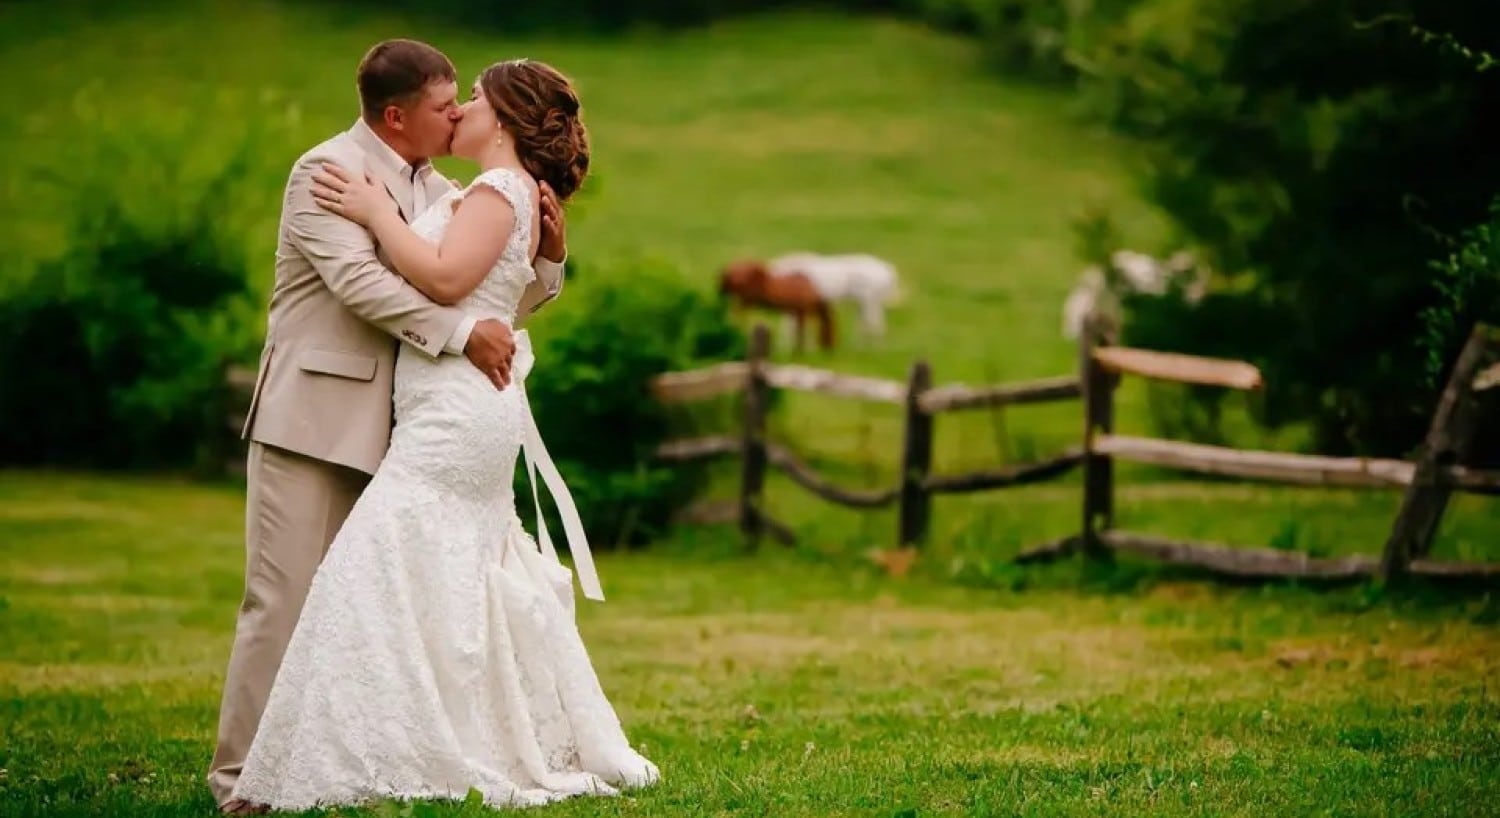 A bride and groom kissing with a fence and horse pasture in the background